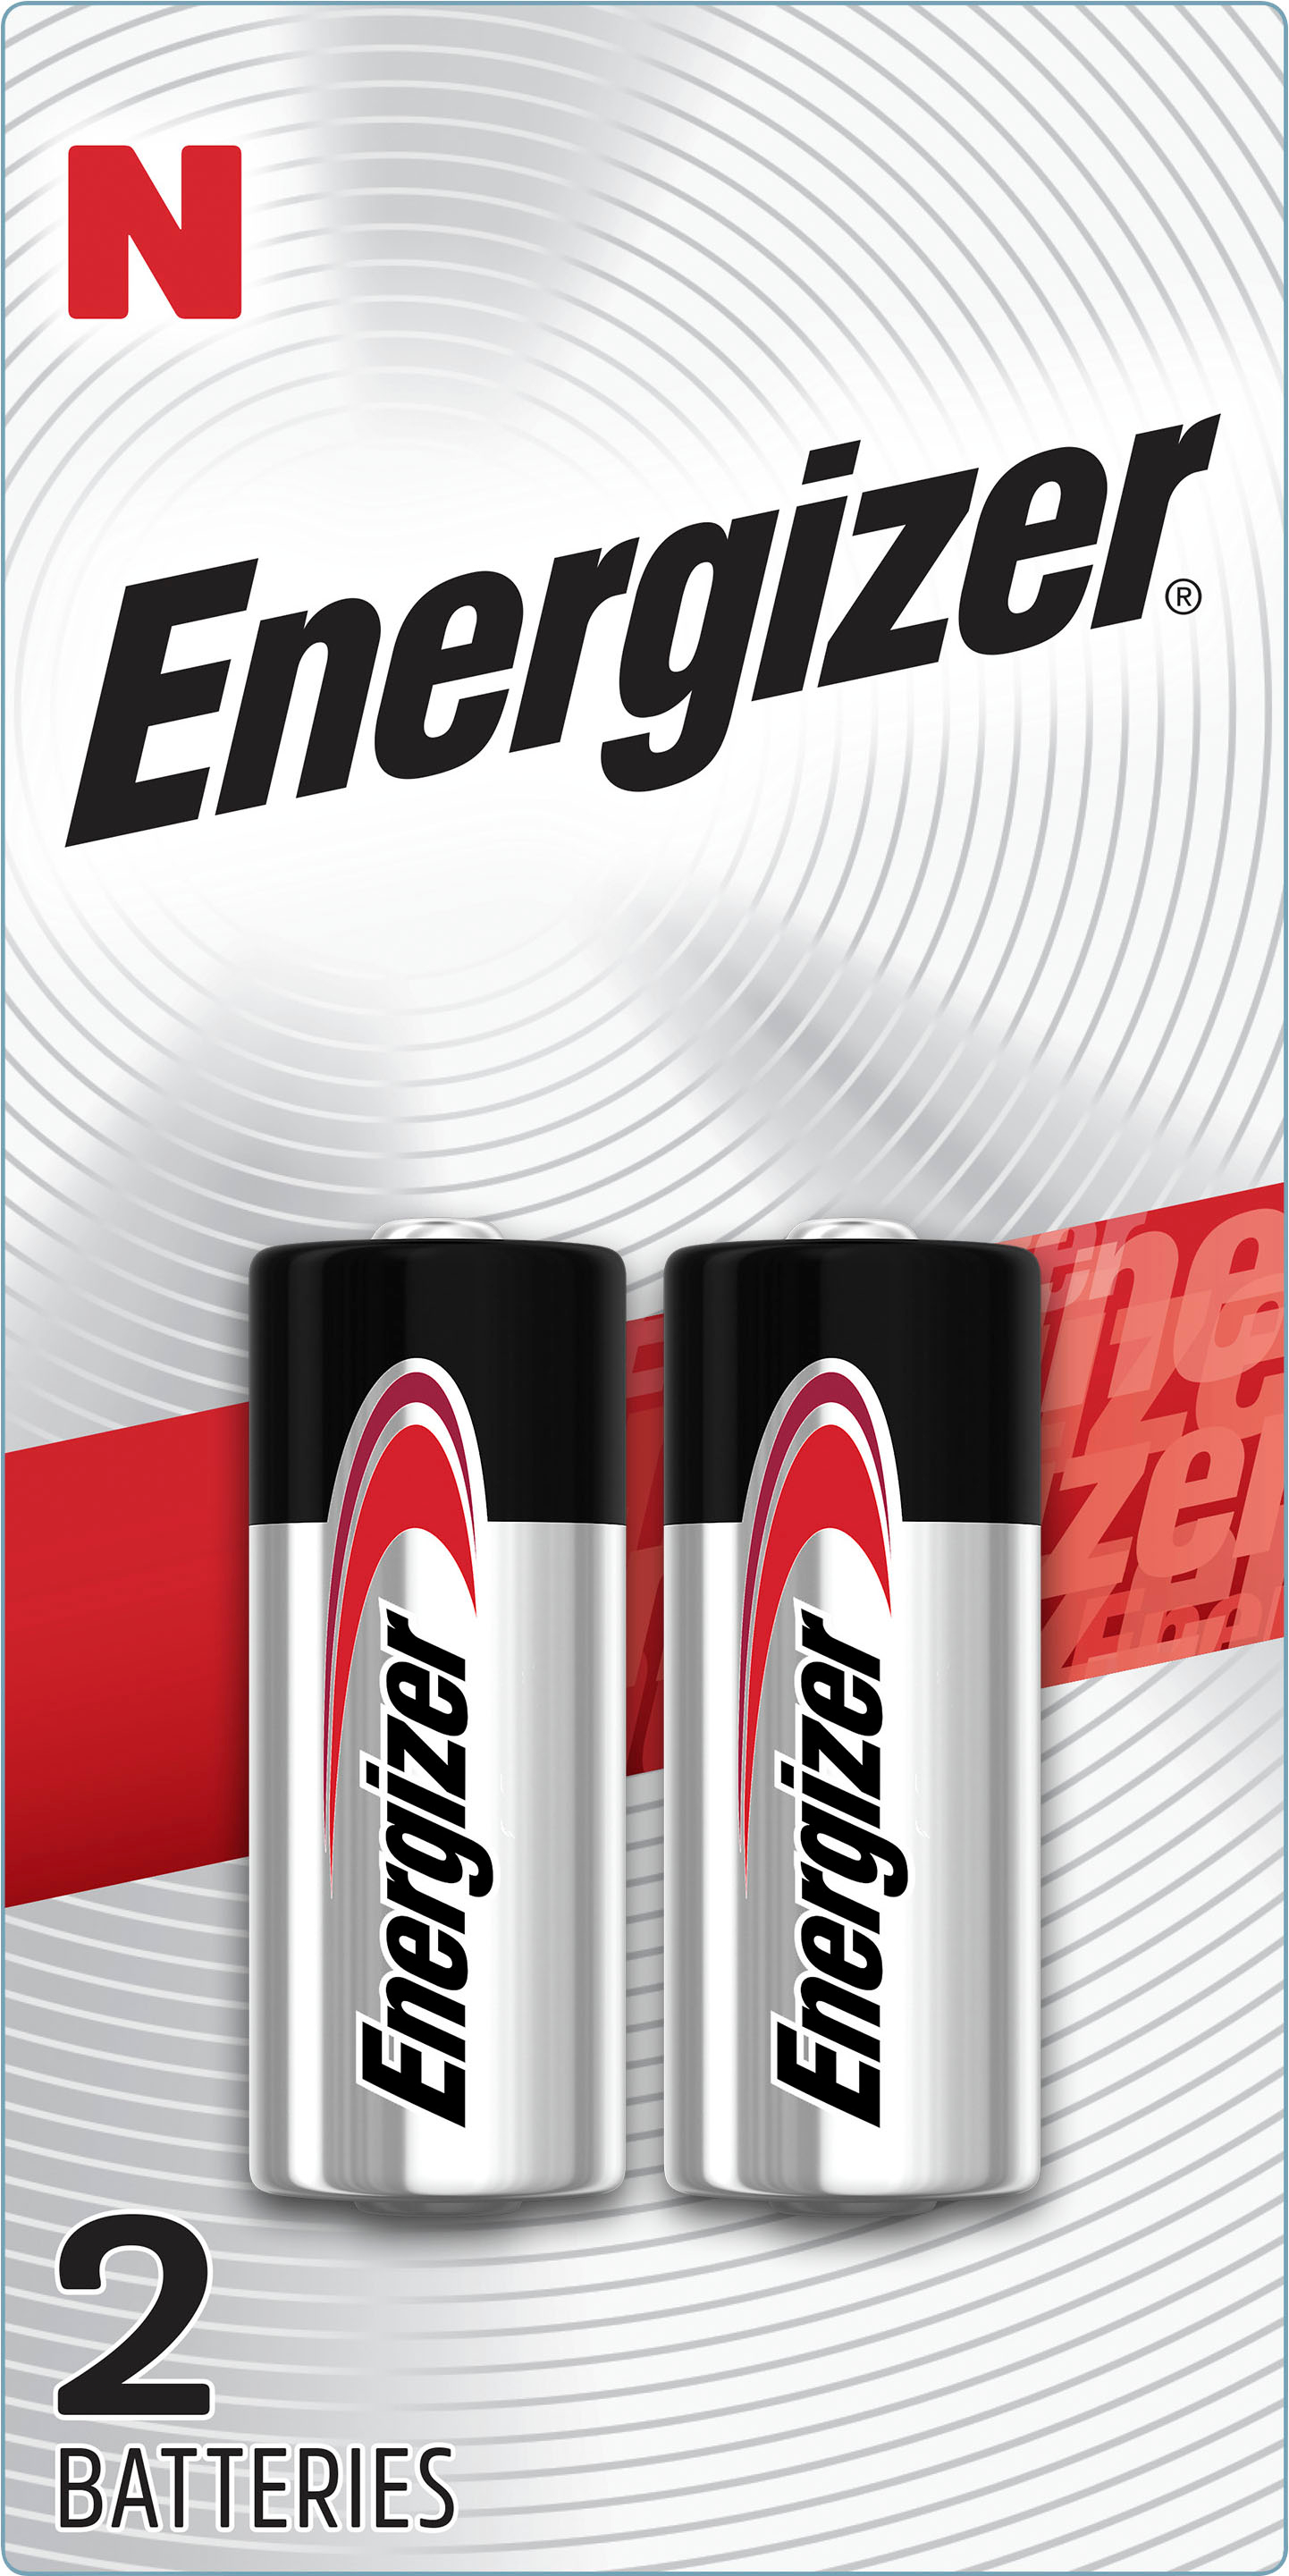 Energizer, Brand store